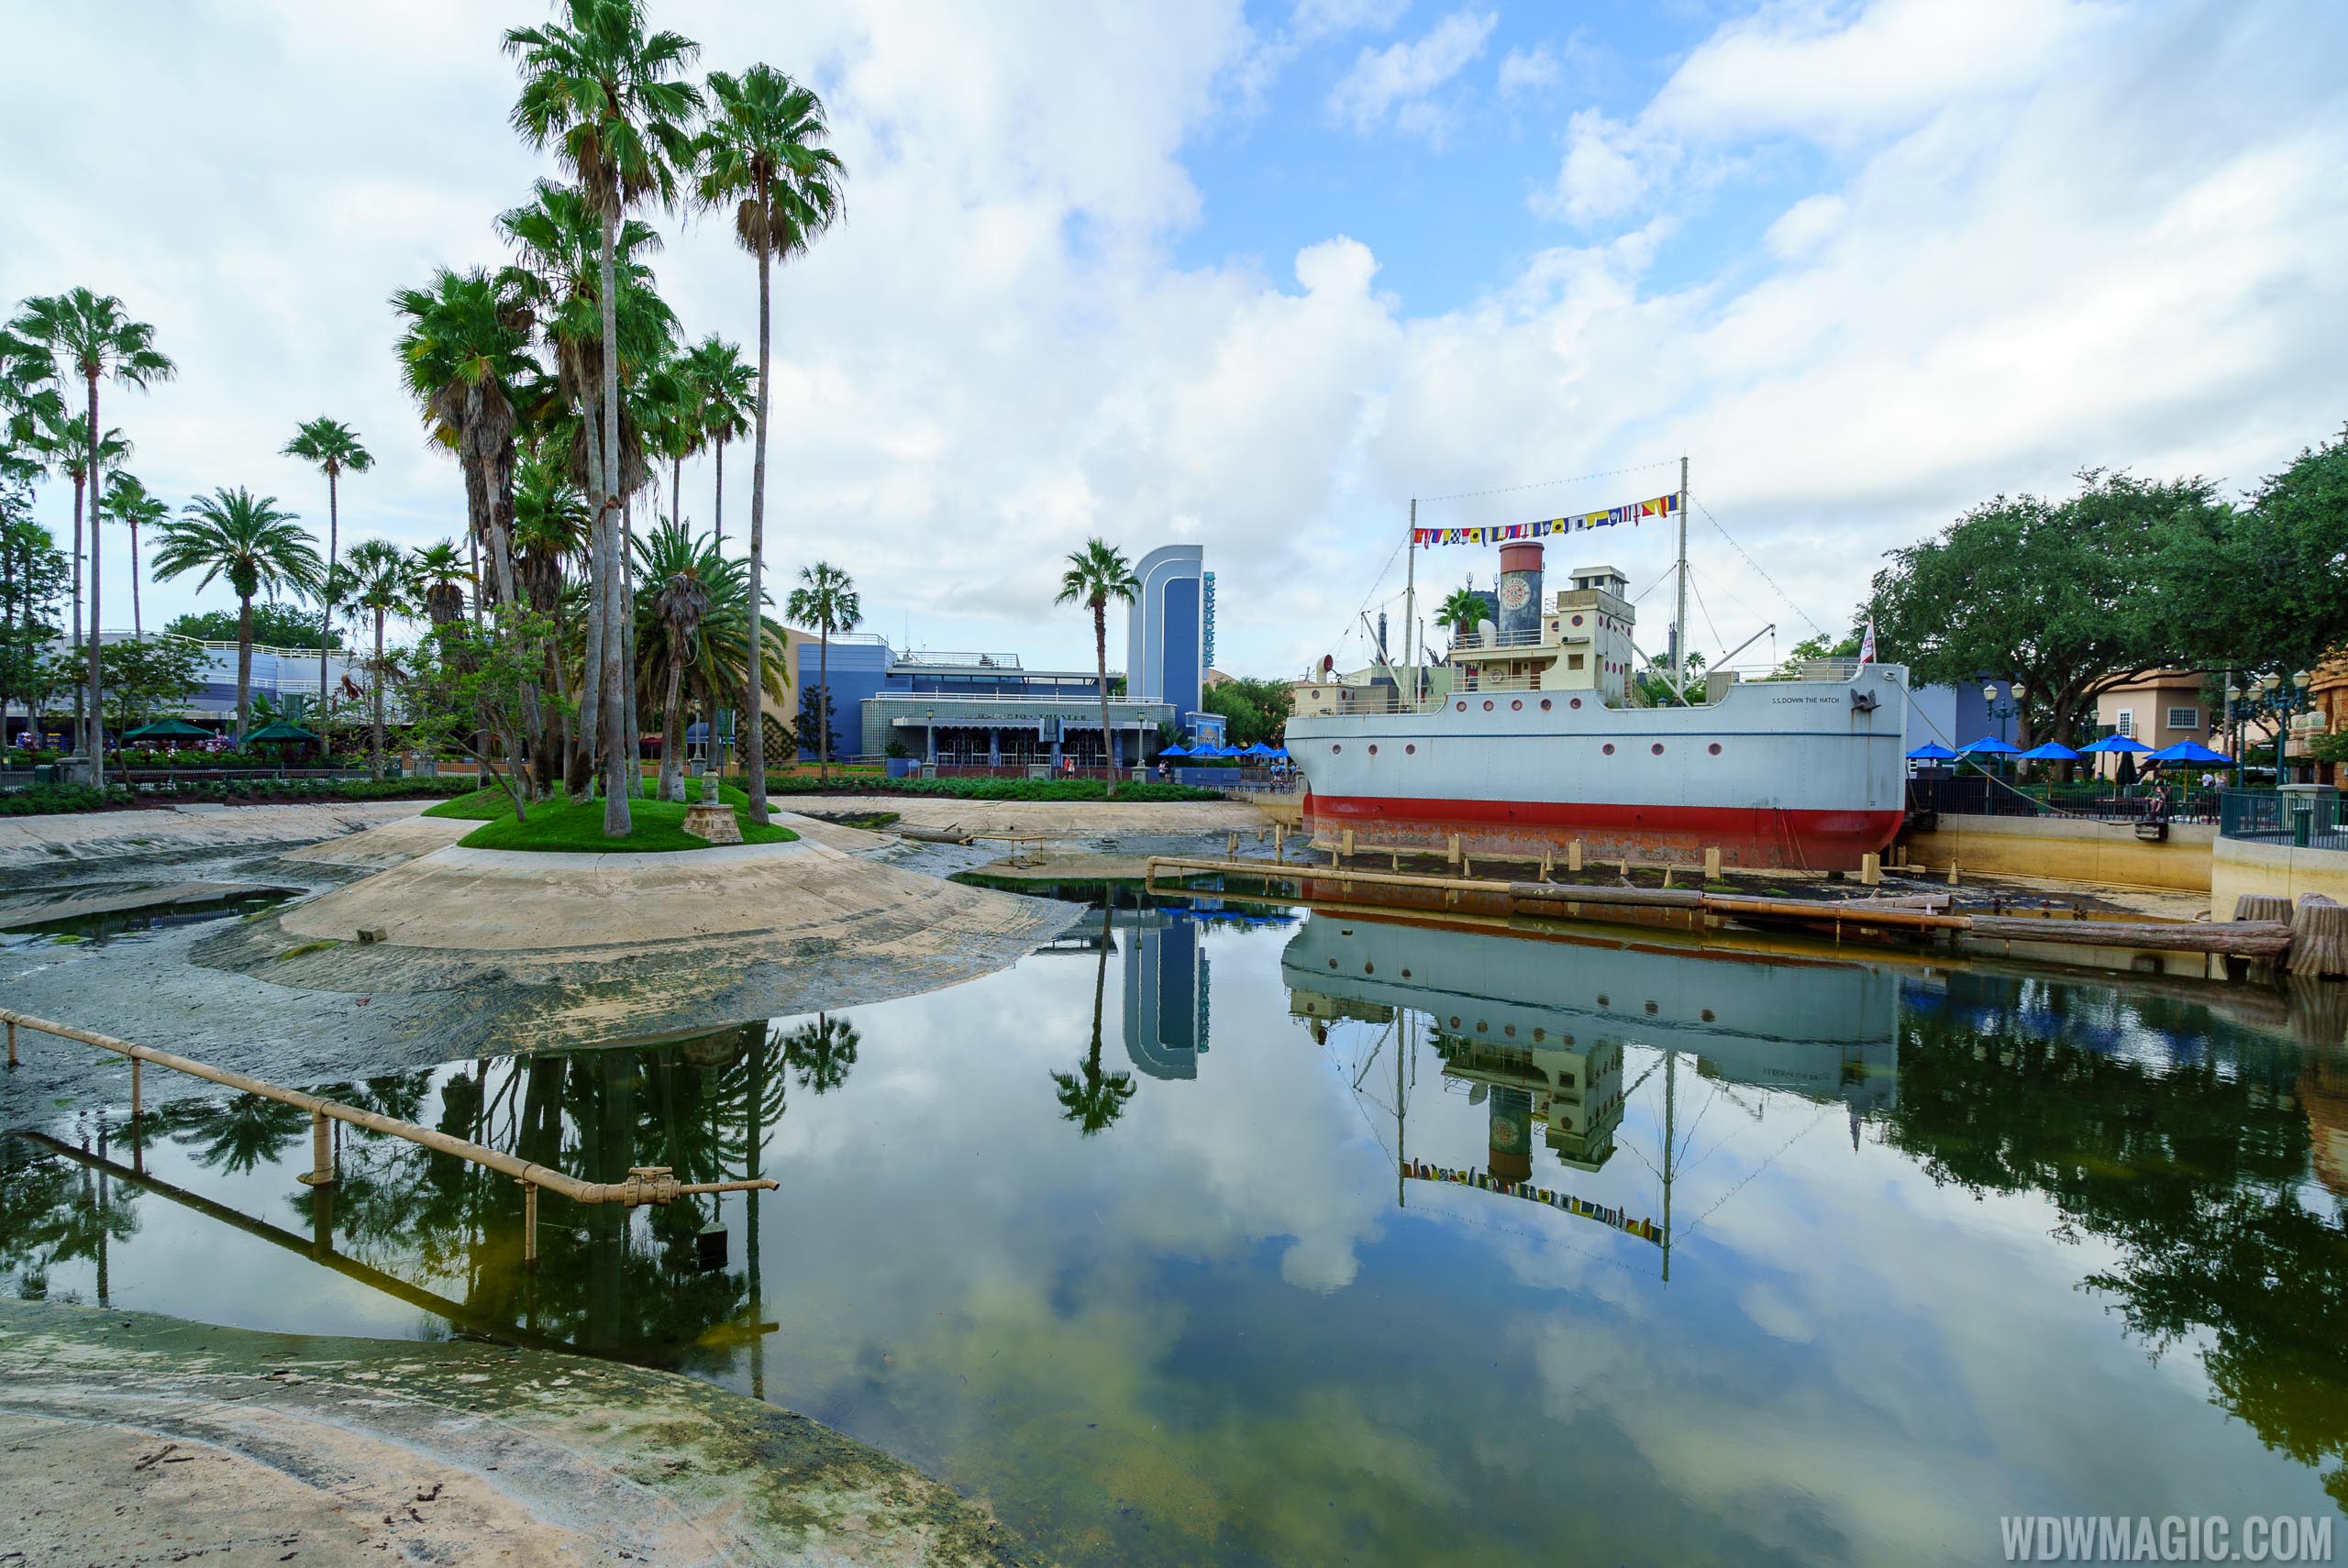 PHOTOS - Echo Lake at Disney's Hollywood Studios drained for